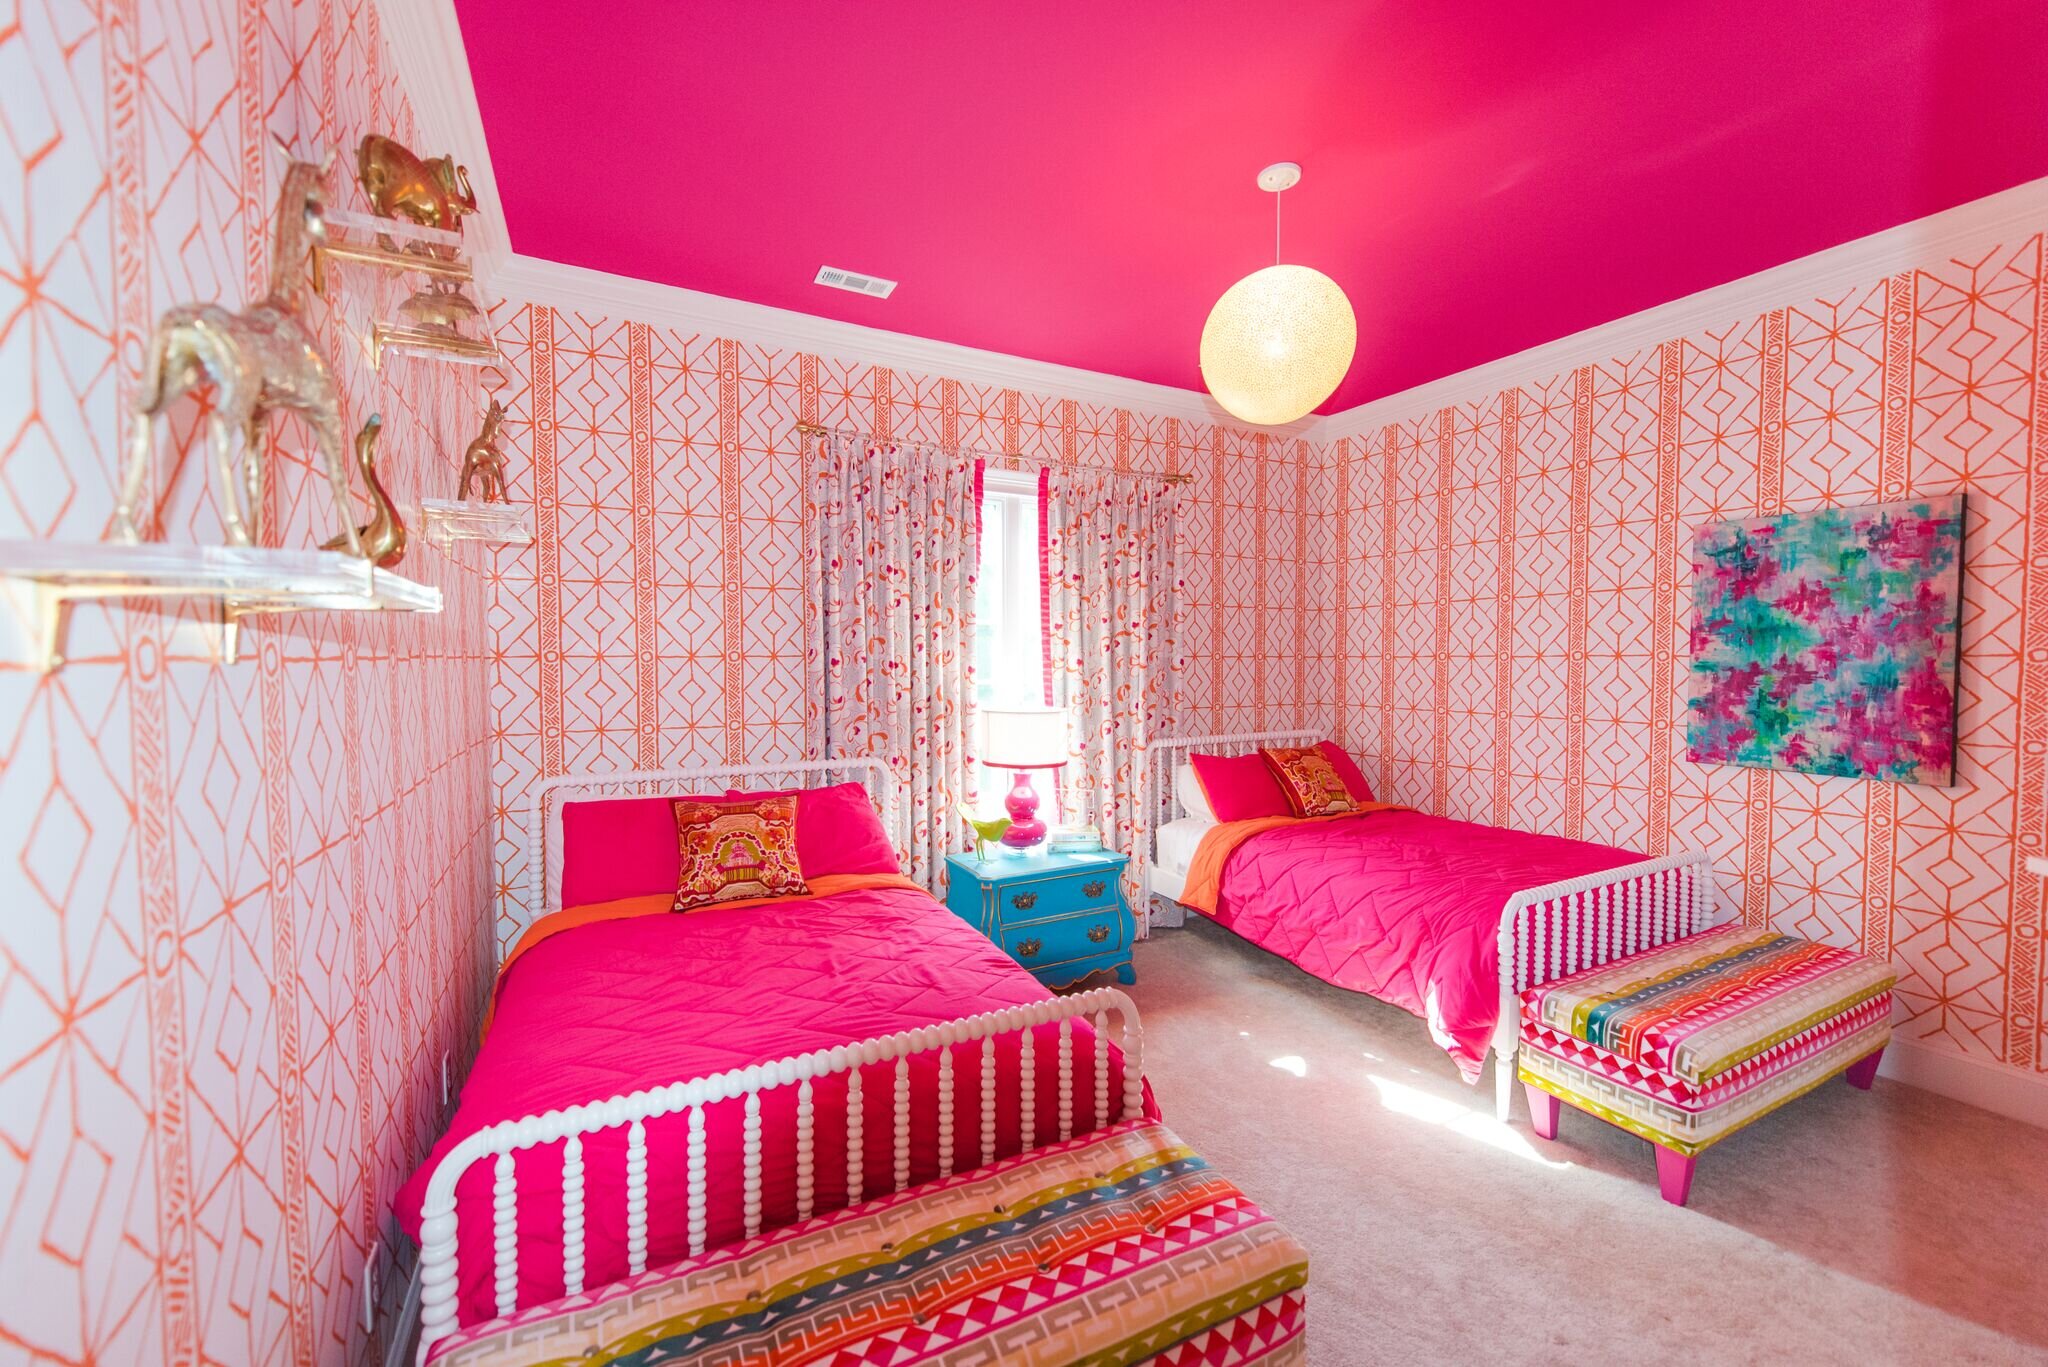 Dwell-Chic-Pink-Paradise-Bedroom-Beds-And-Benches.jpg